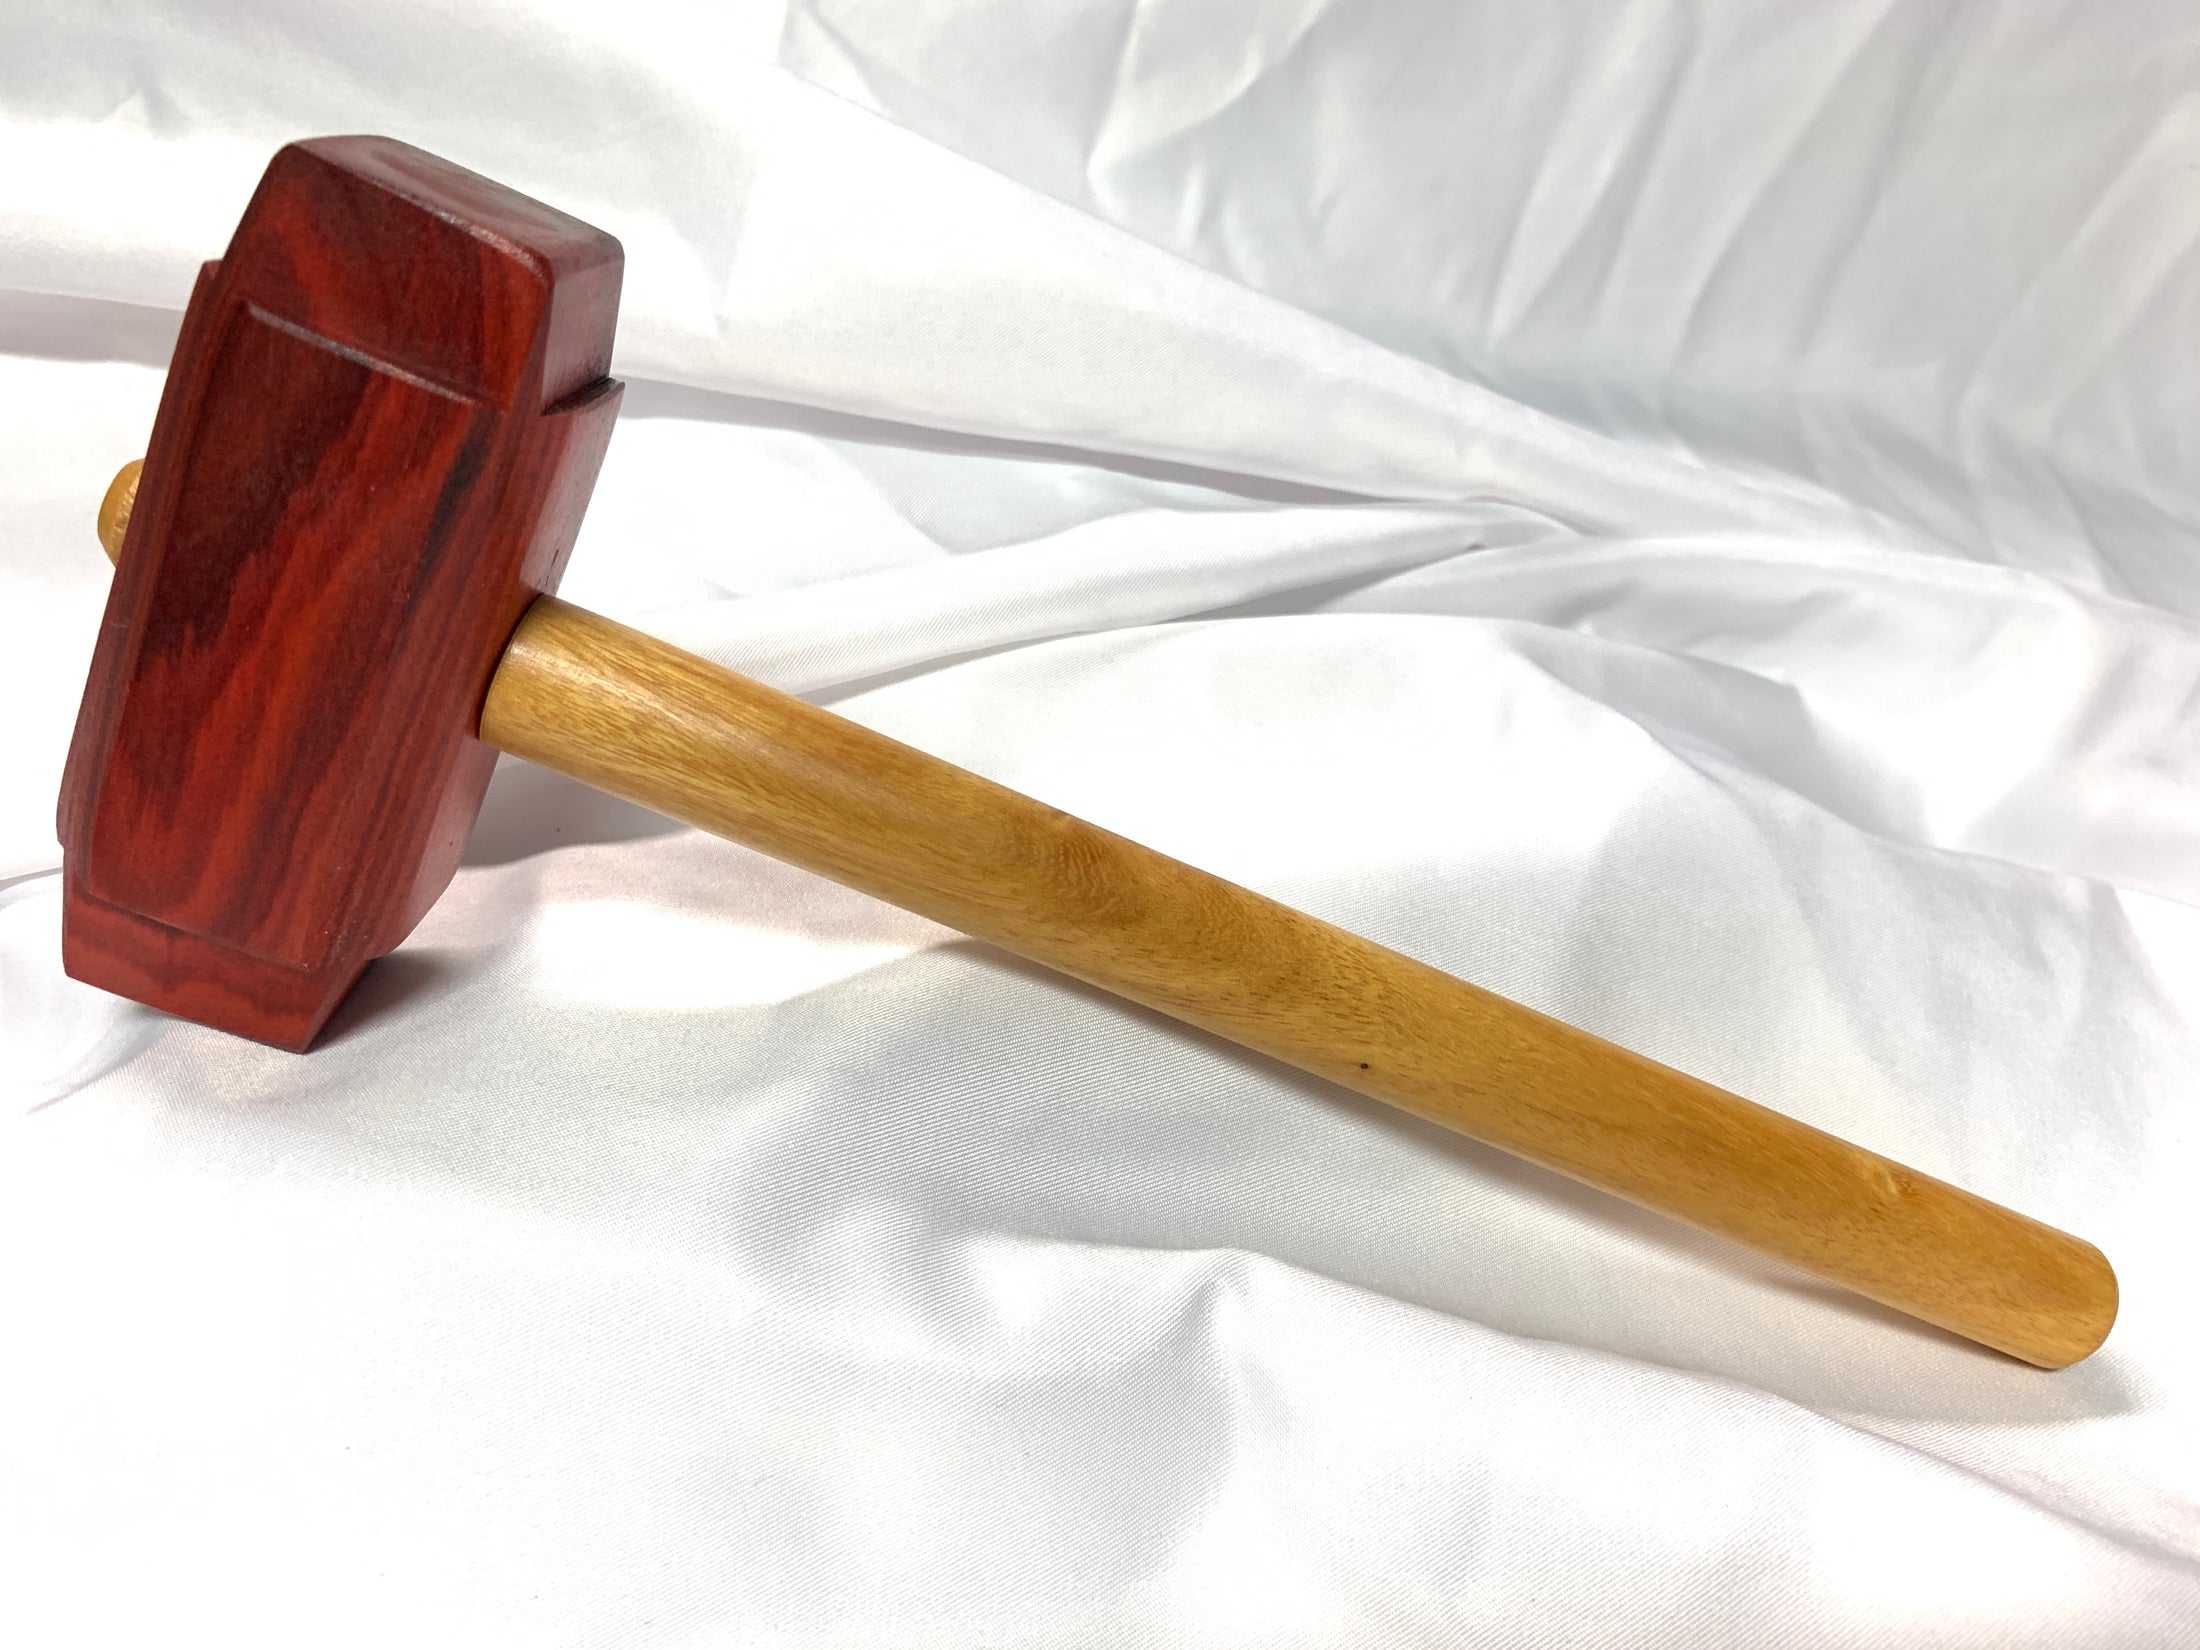 Thors Hammer Woodworking Mallet Redheart Head with Osage Orange Handle Kings Fine Woodworking